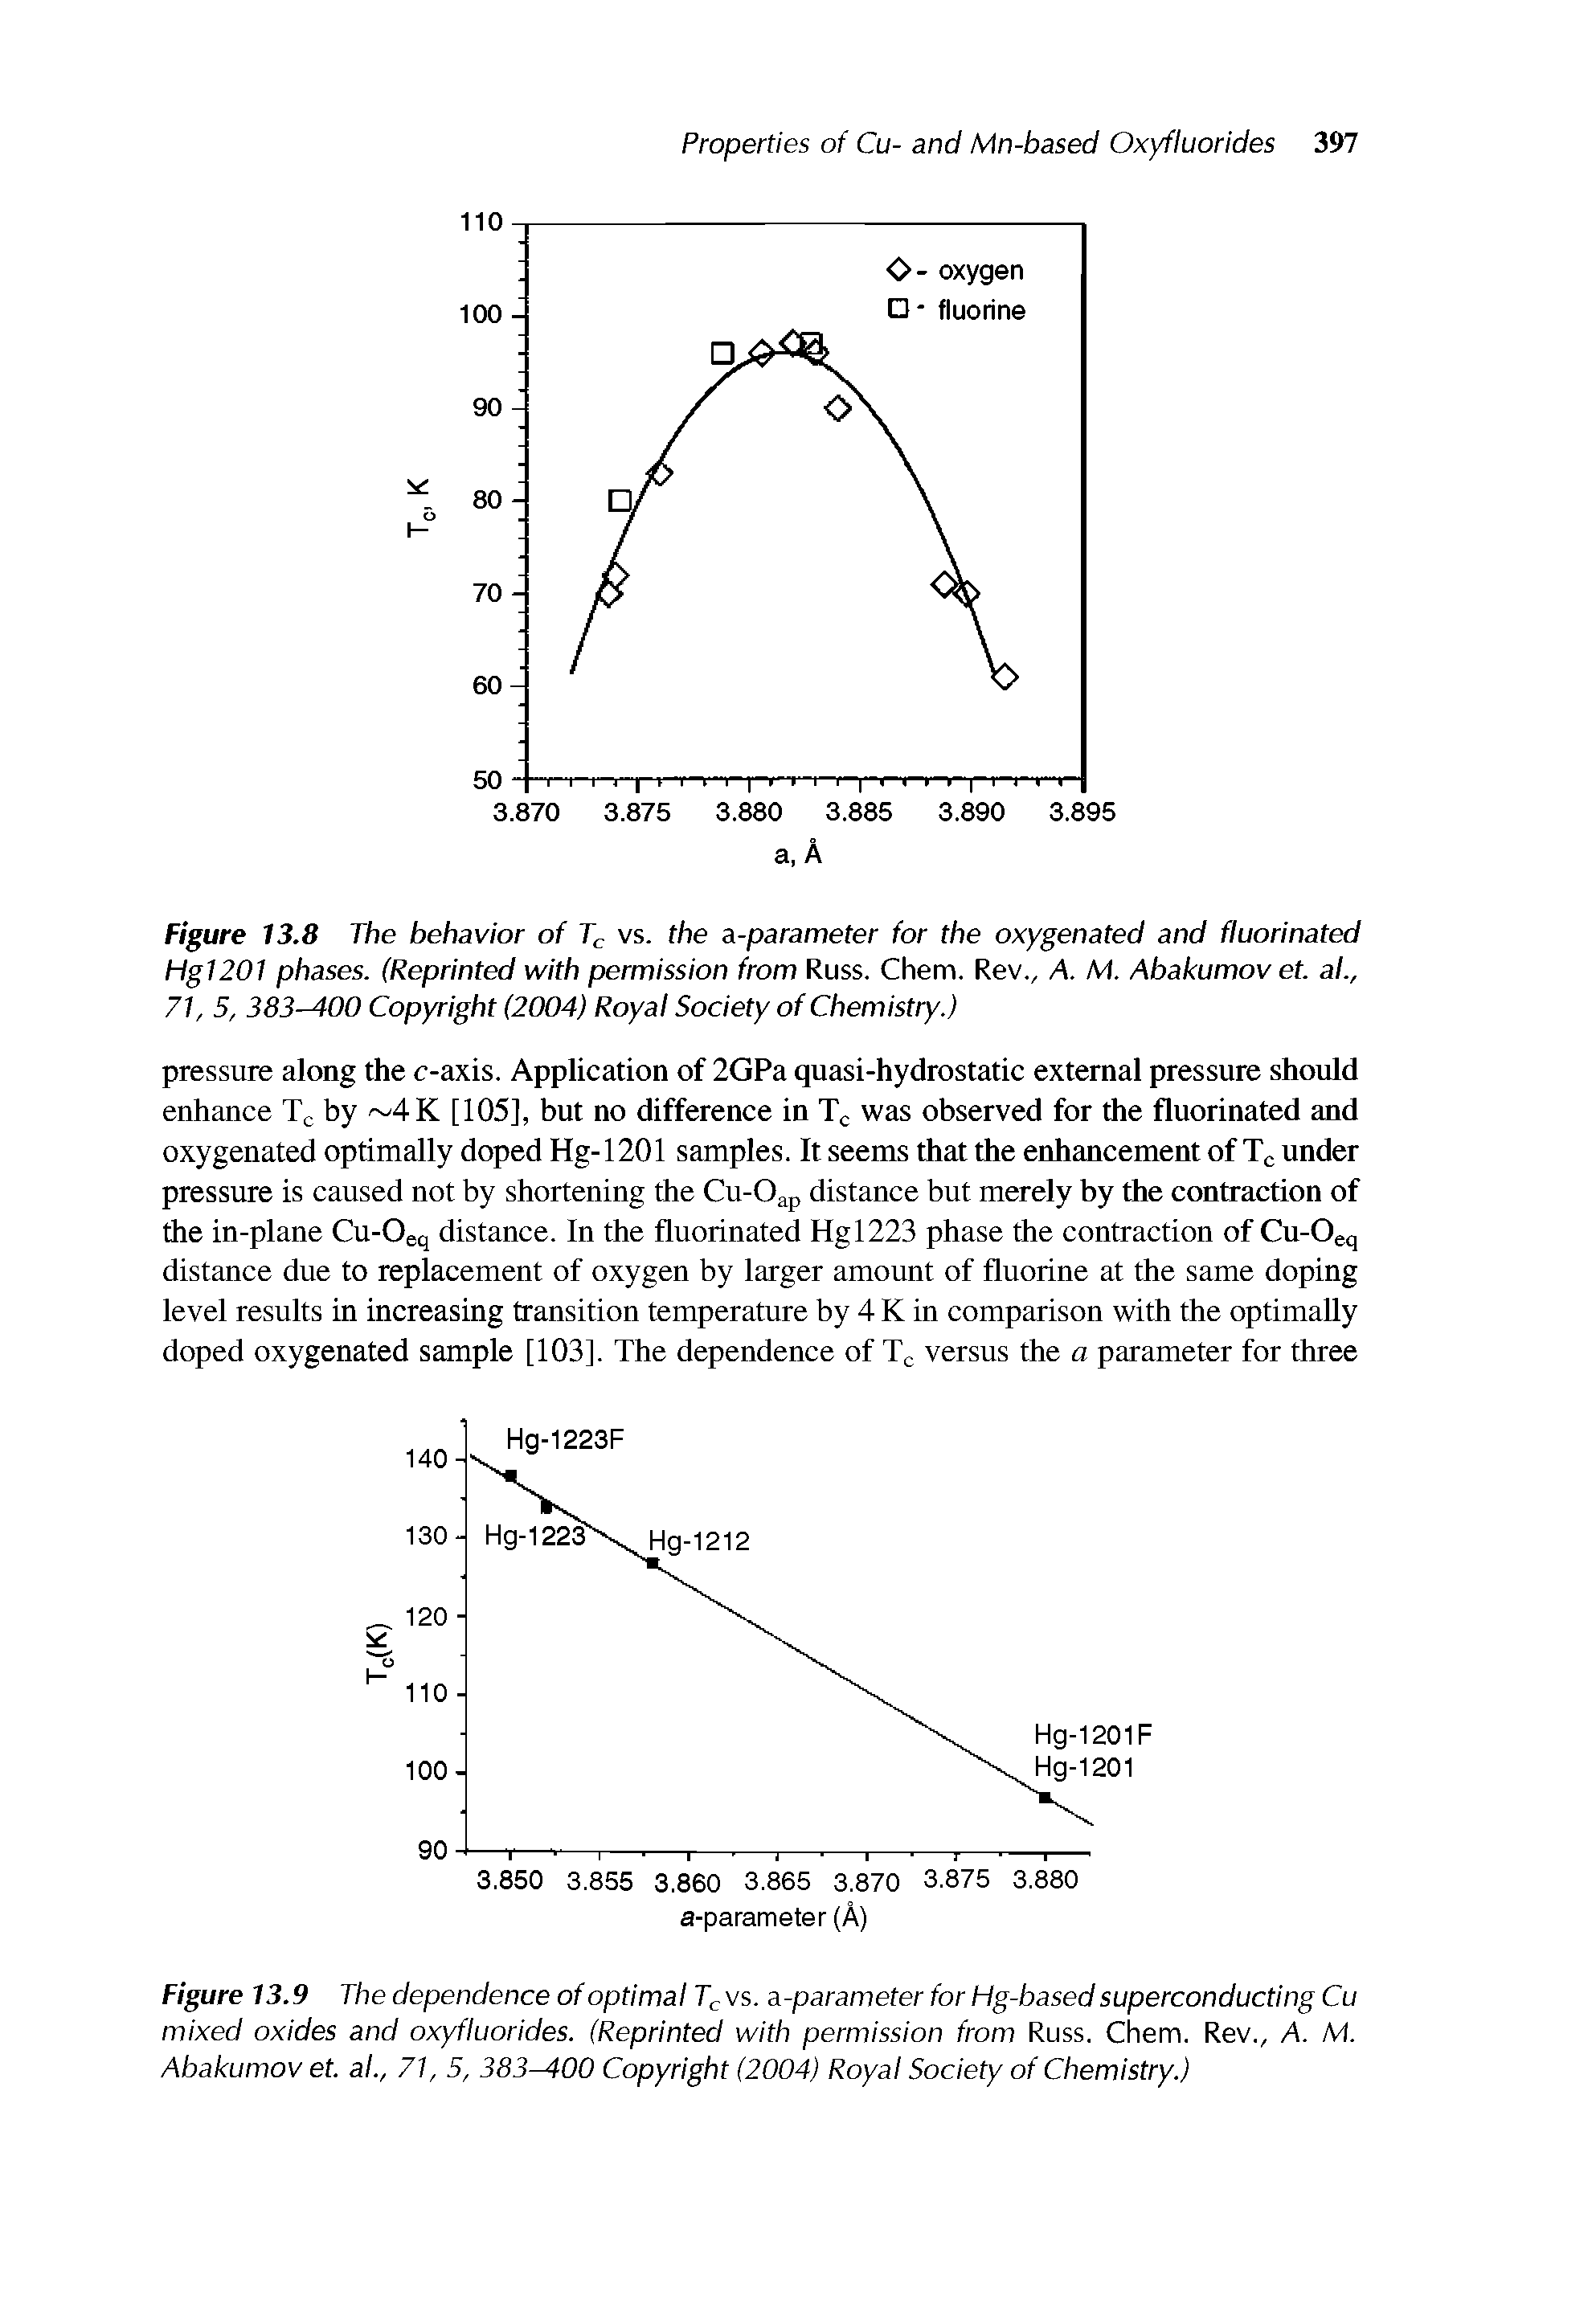 Figure 13.9 The dependence of optimal Tc vs. a-parameter for Hg-based superconducting Cu mixed oxides and oxyfluorides. (Reprinted with permission from Russ. Chem. Rev., A. M. Abakumov et. ai, 71, 5, 383 00 Copyright (2004) Royal Society of Chemistry.)...